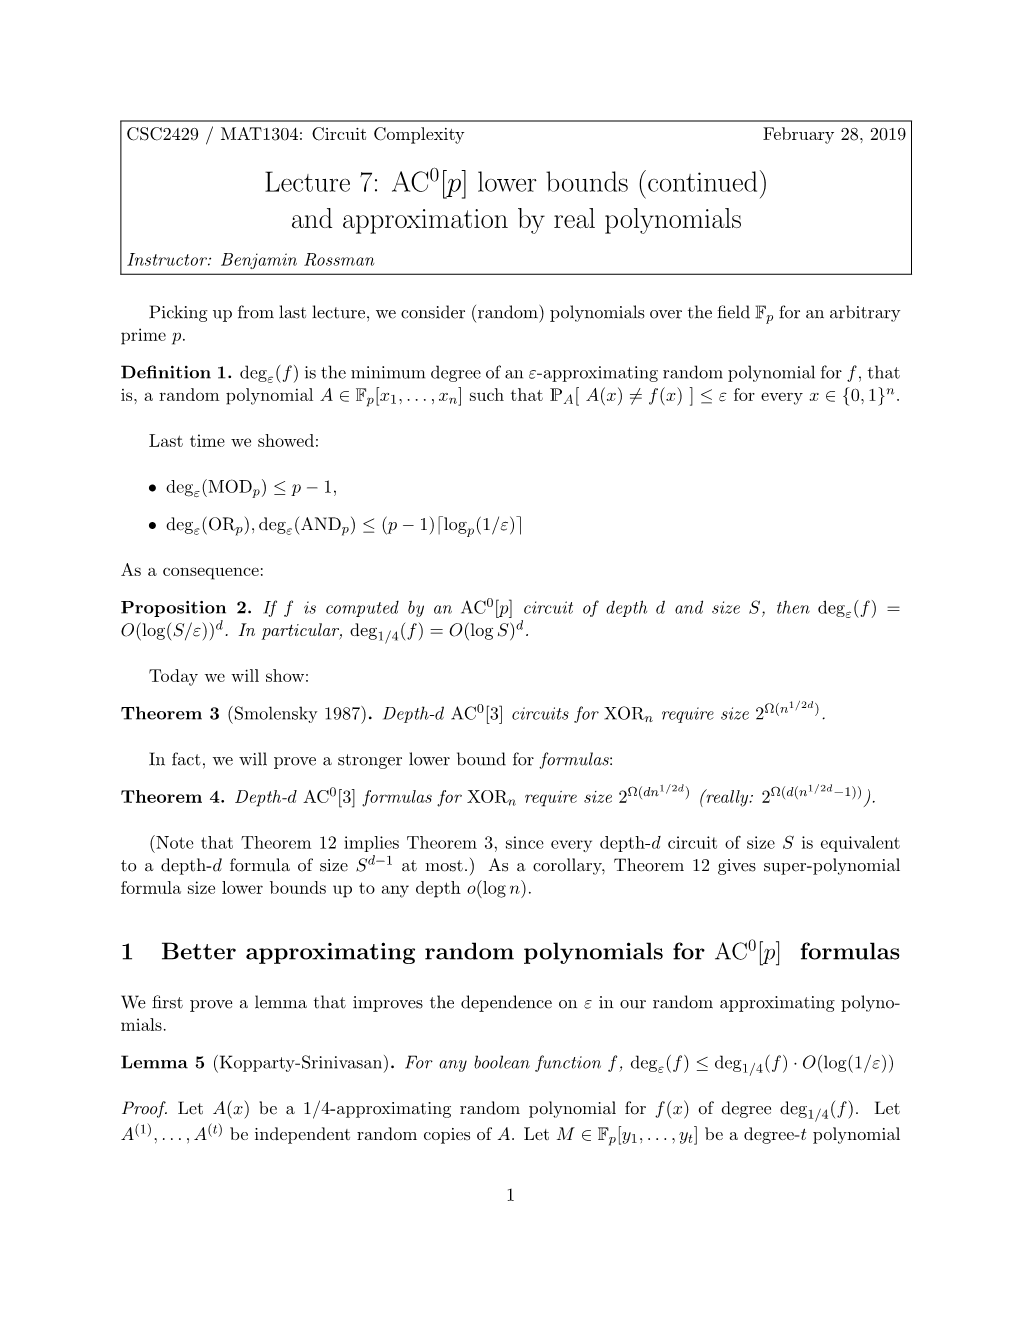 Lecture 7: AC0[P] Lower Bounds (Continued) and Approximation by Real Polynomials Instructor: Benjamin Rossman